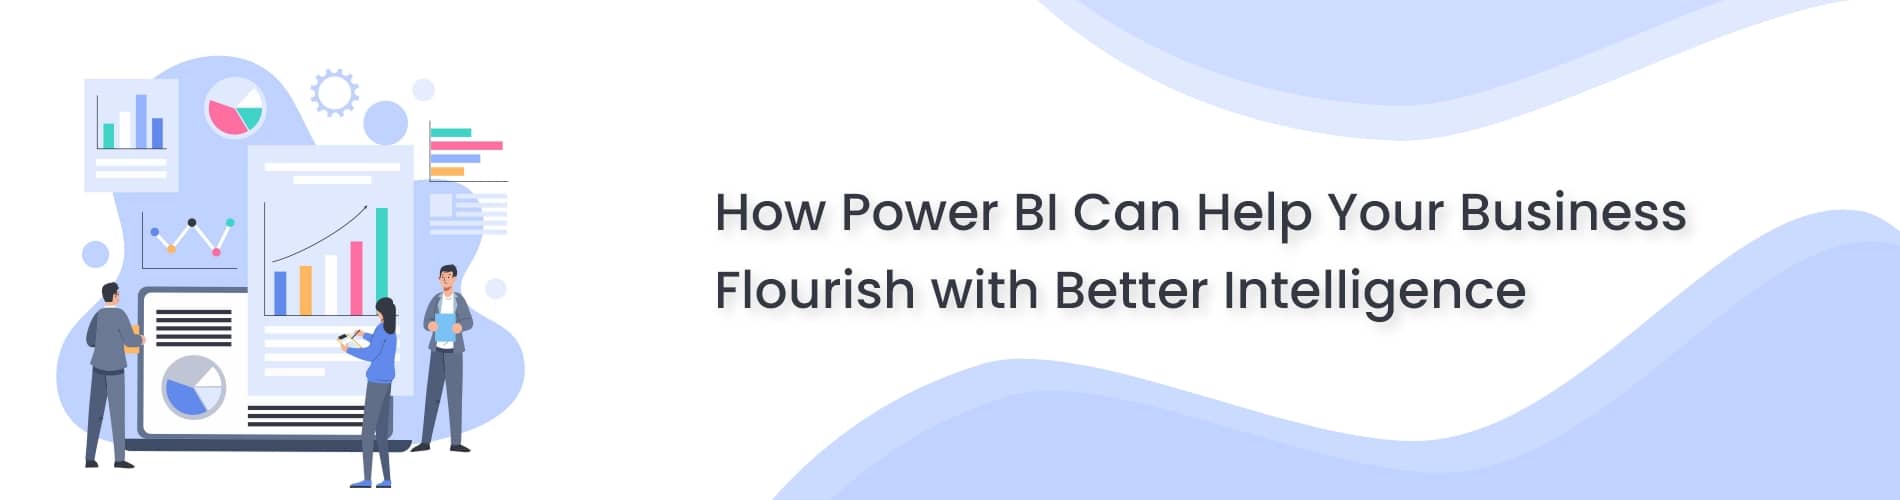 how power bi can help businesses